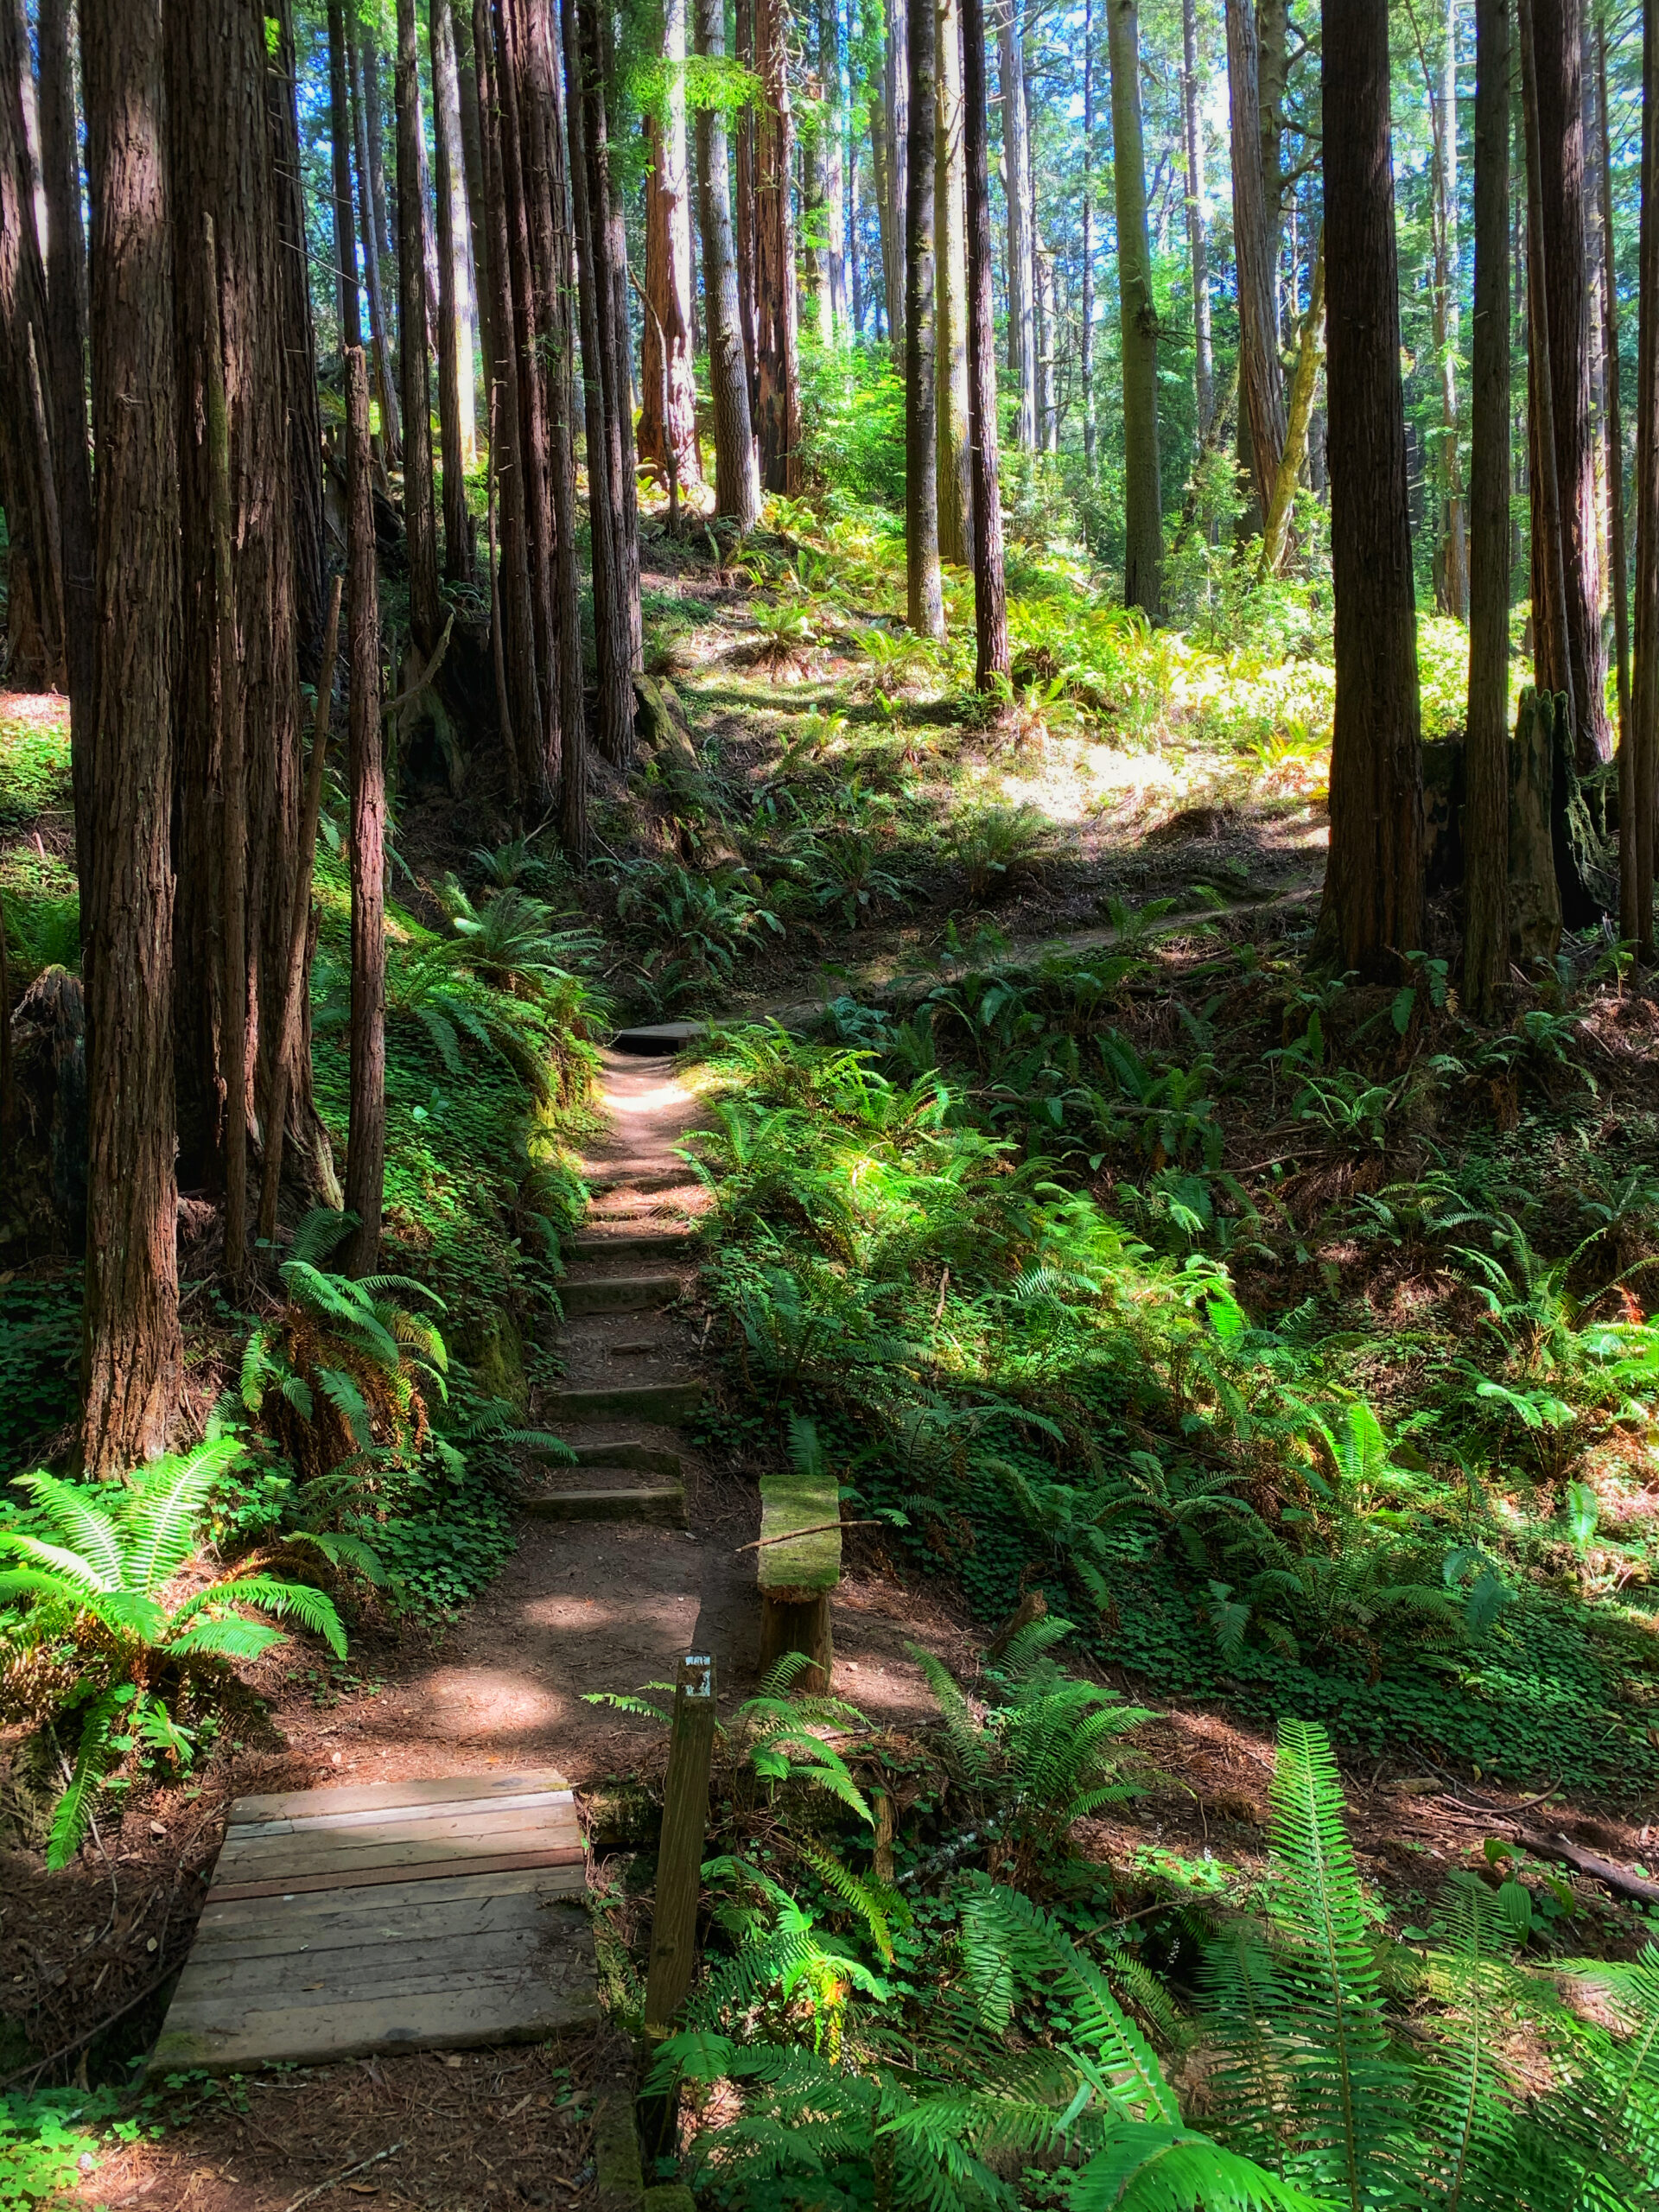 A wooden path leads through a forest of redwood trees.